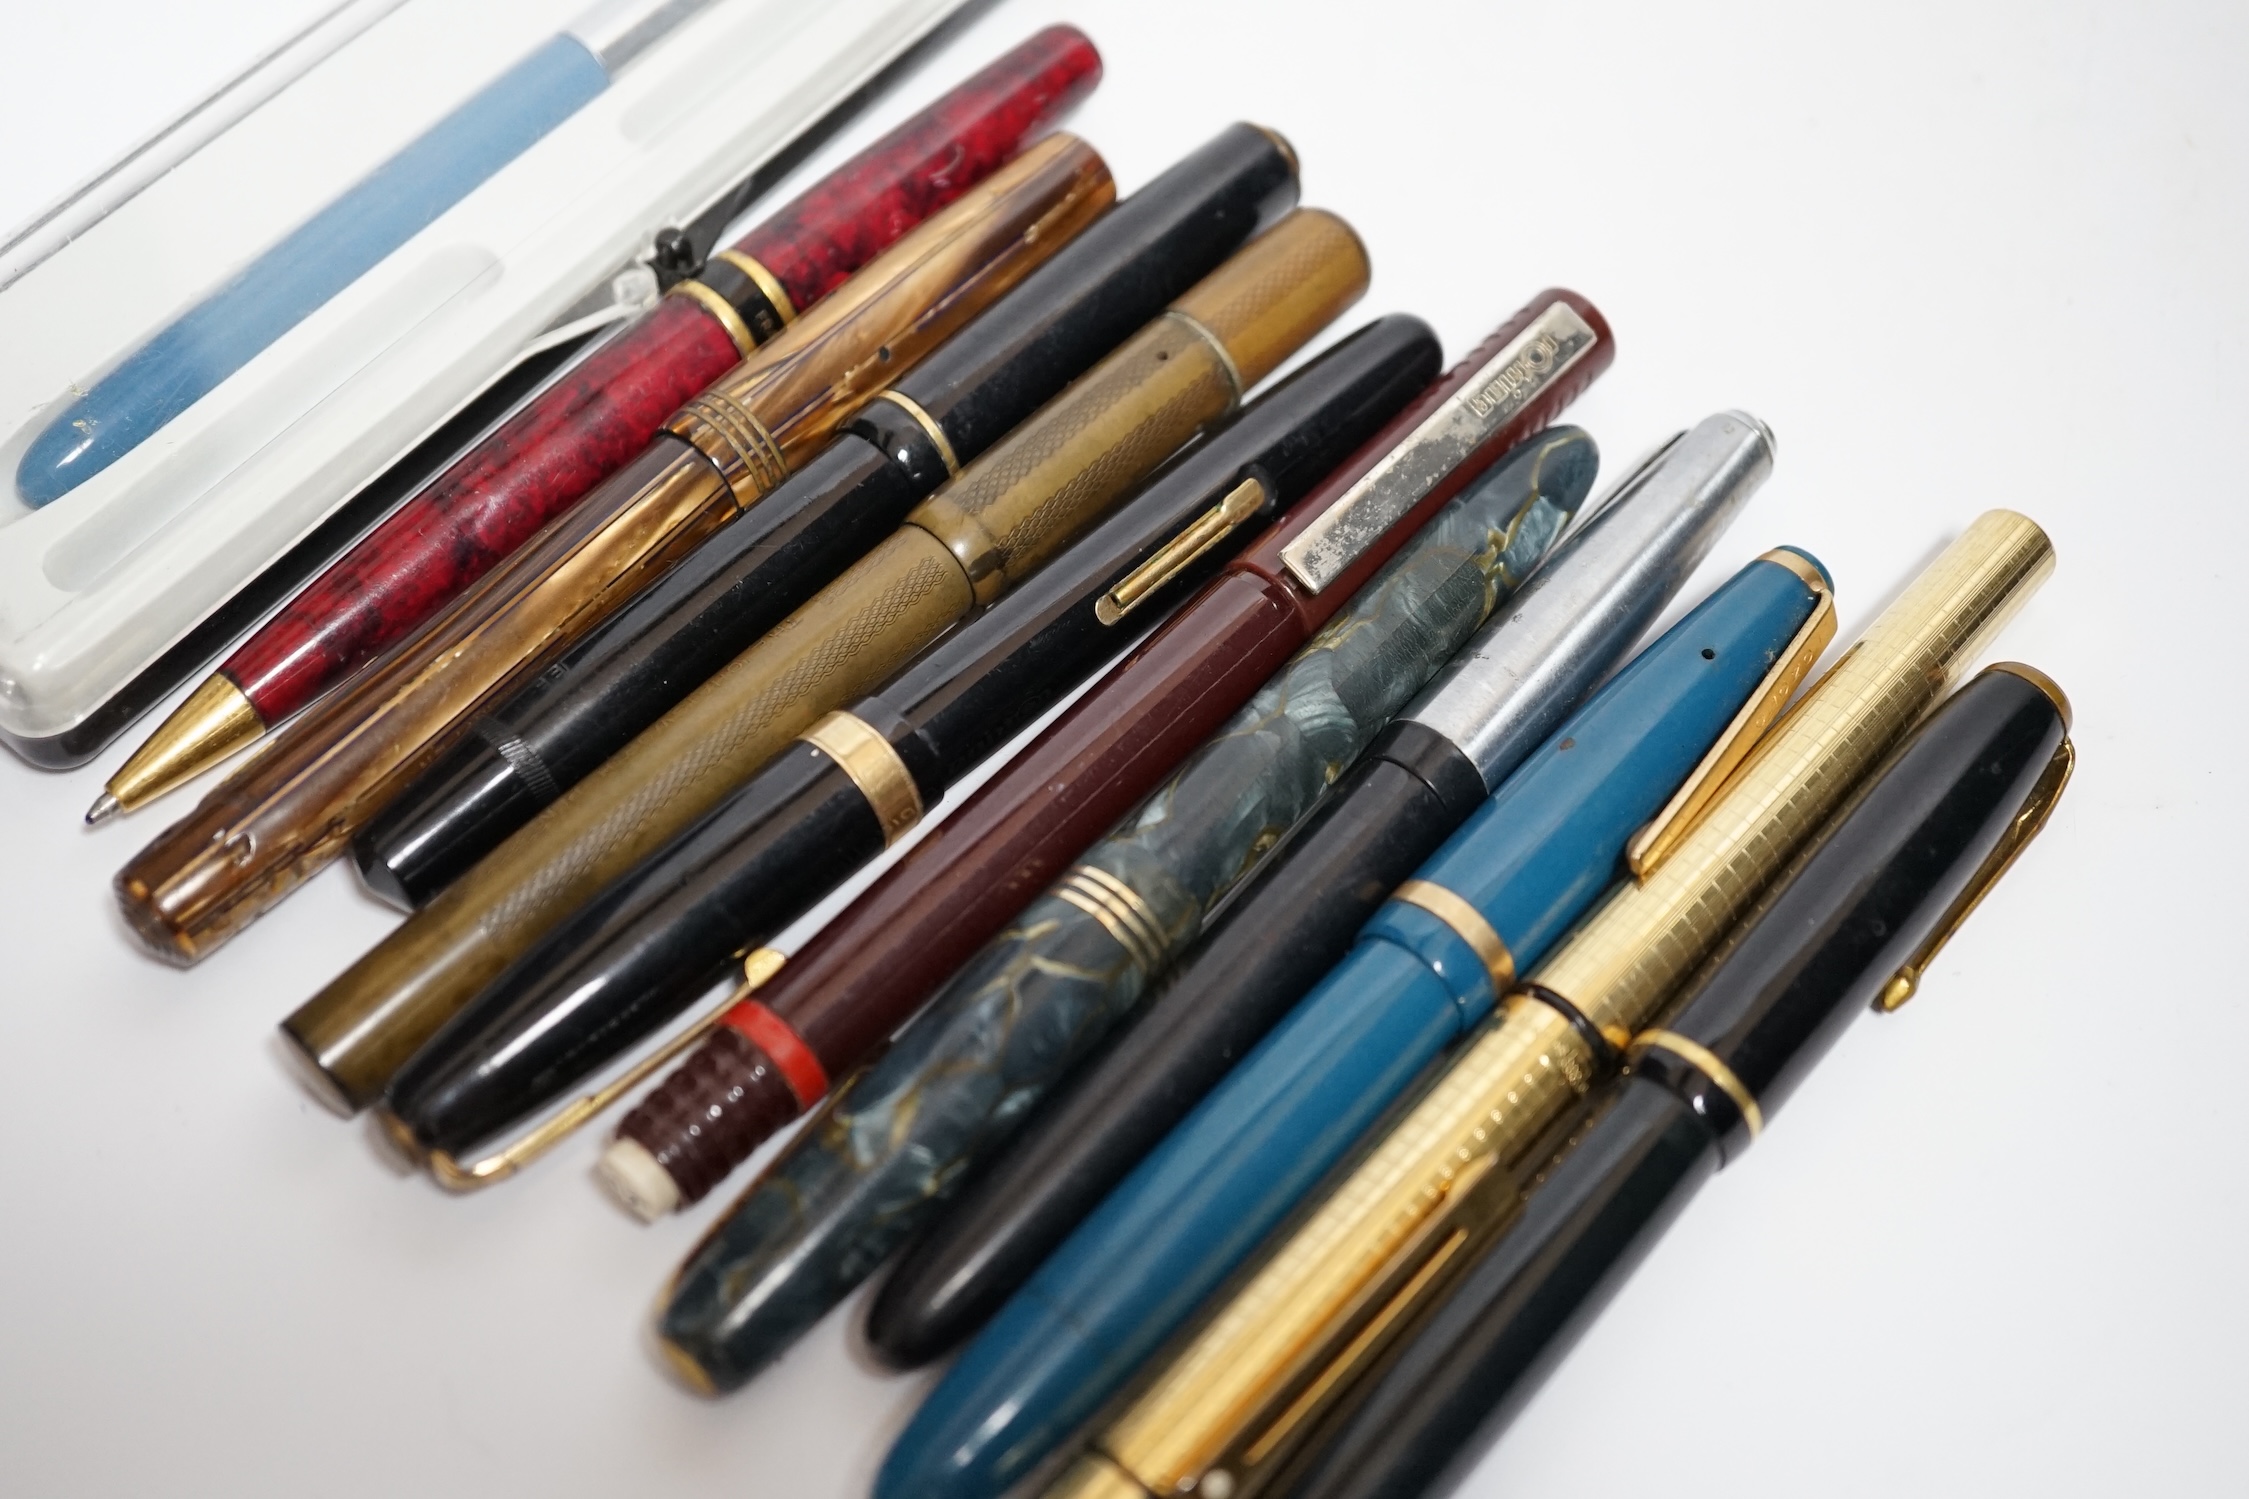 A quantity of fountain pens including Watermans and Sheaffer